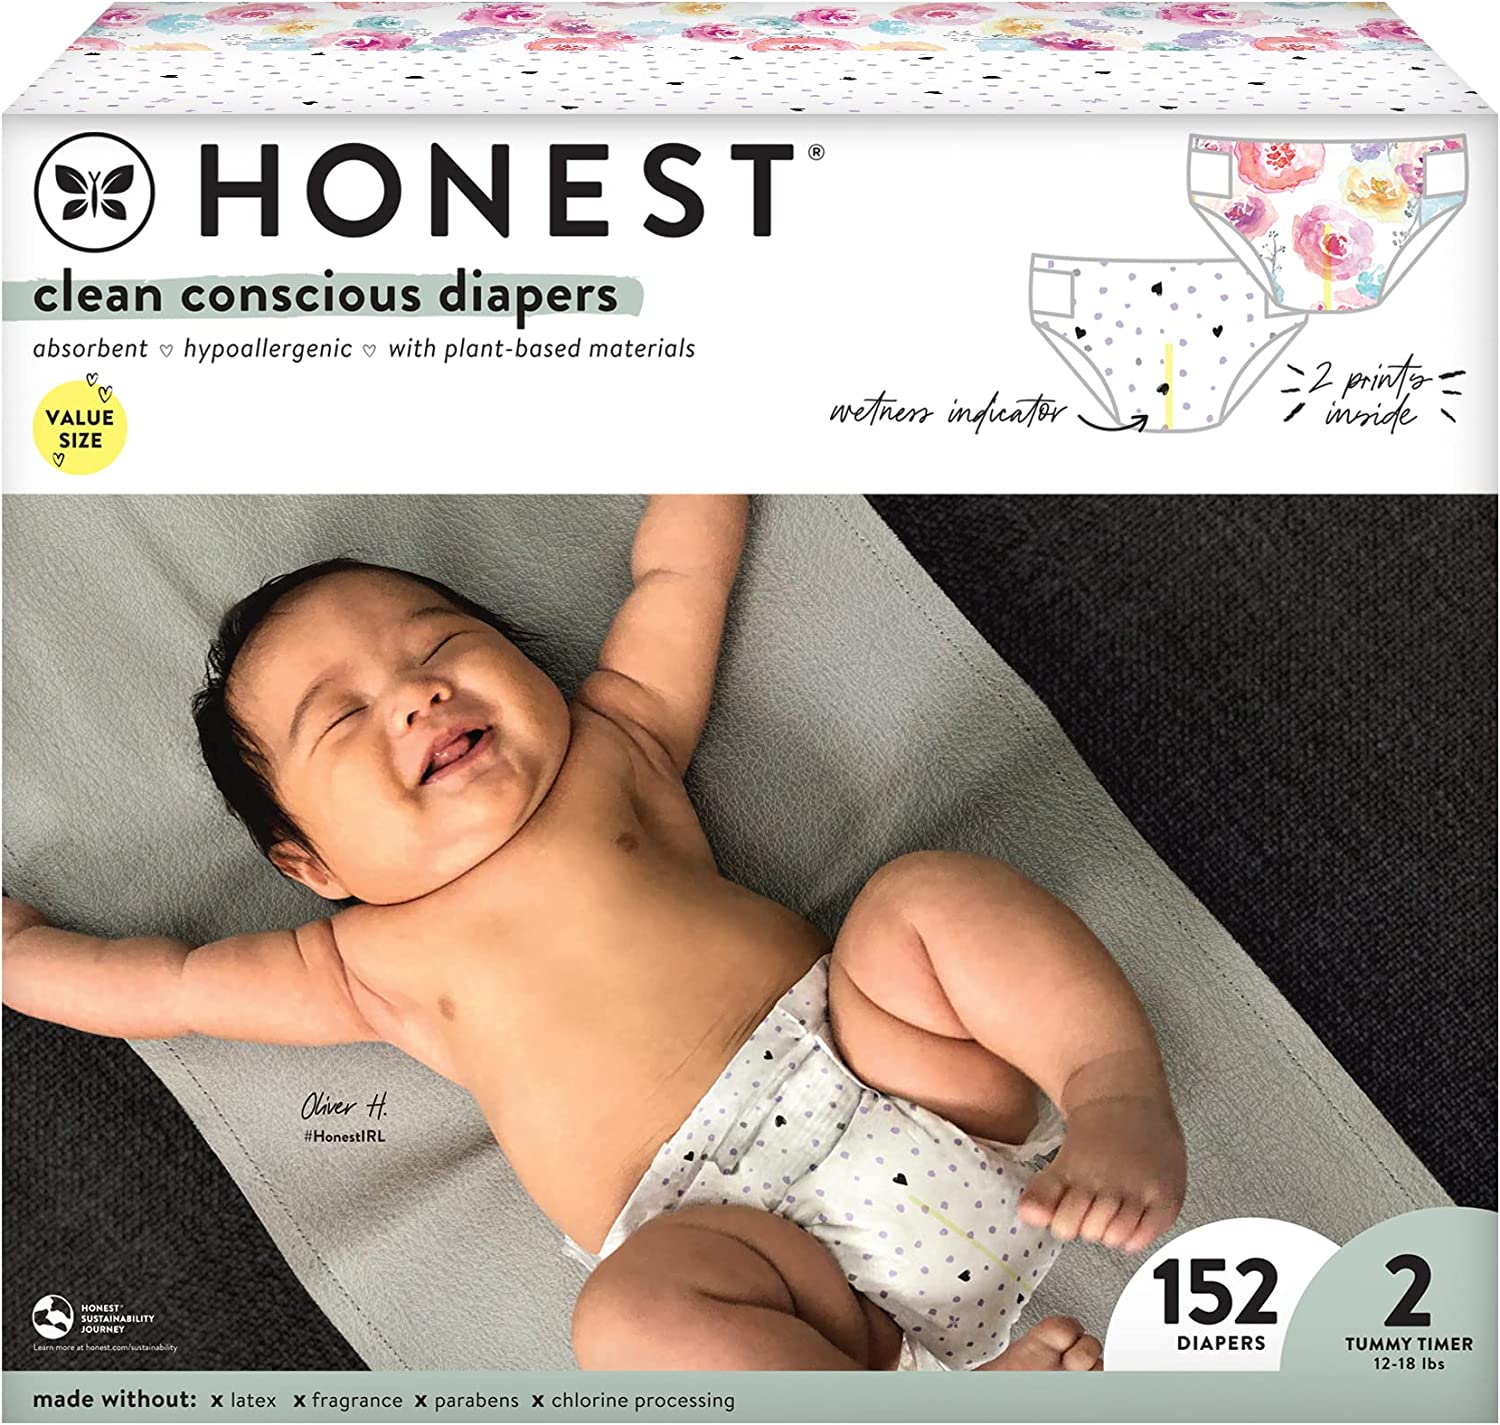 The Honest Company Clean Conscious Diapers | Plant-Based, Sustainable | Young At Heart + Rose Blossom | Super Club Box, Size 2 (12-18 lbs), 152 Count